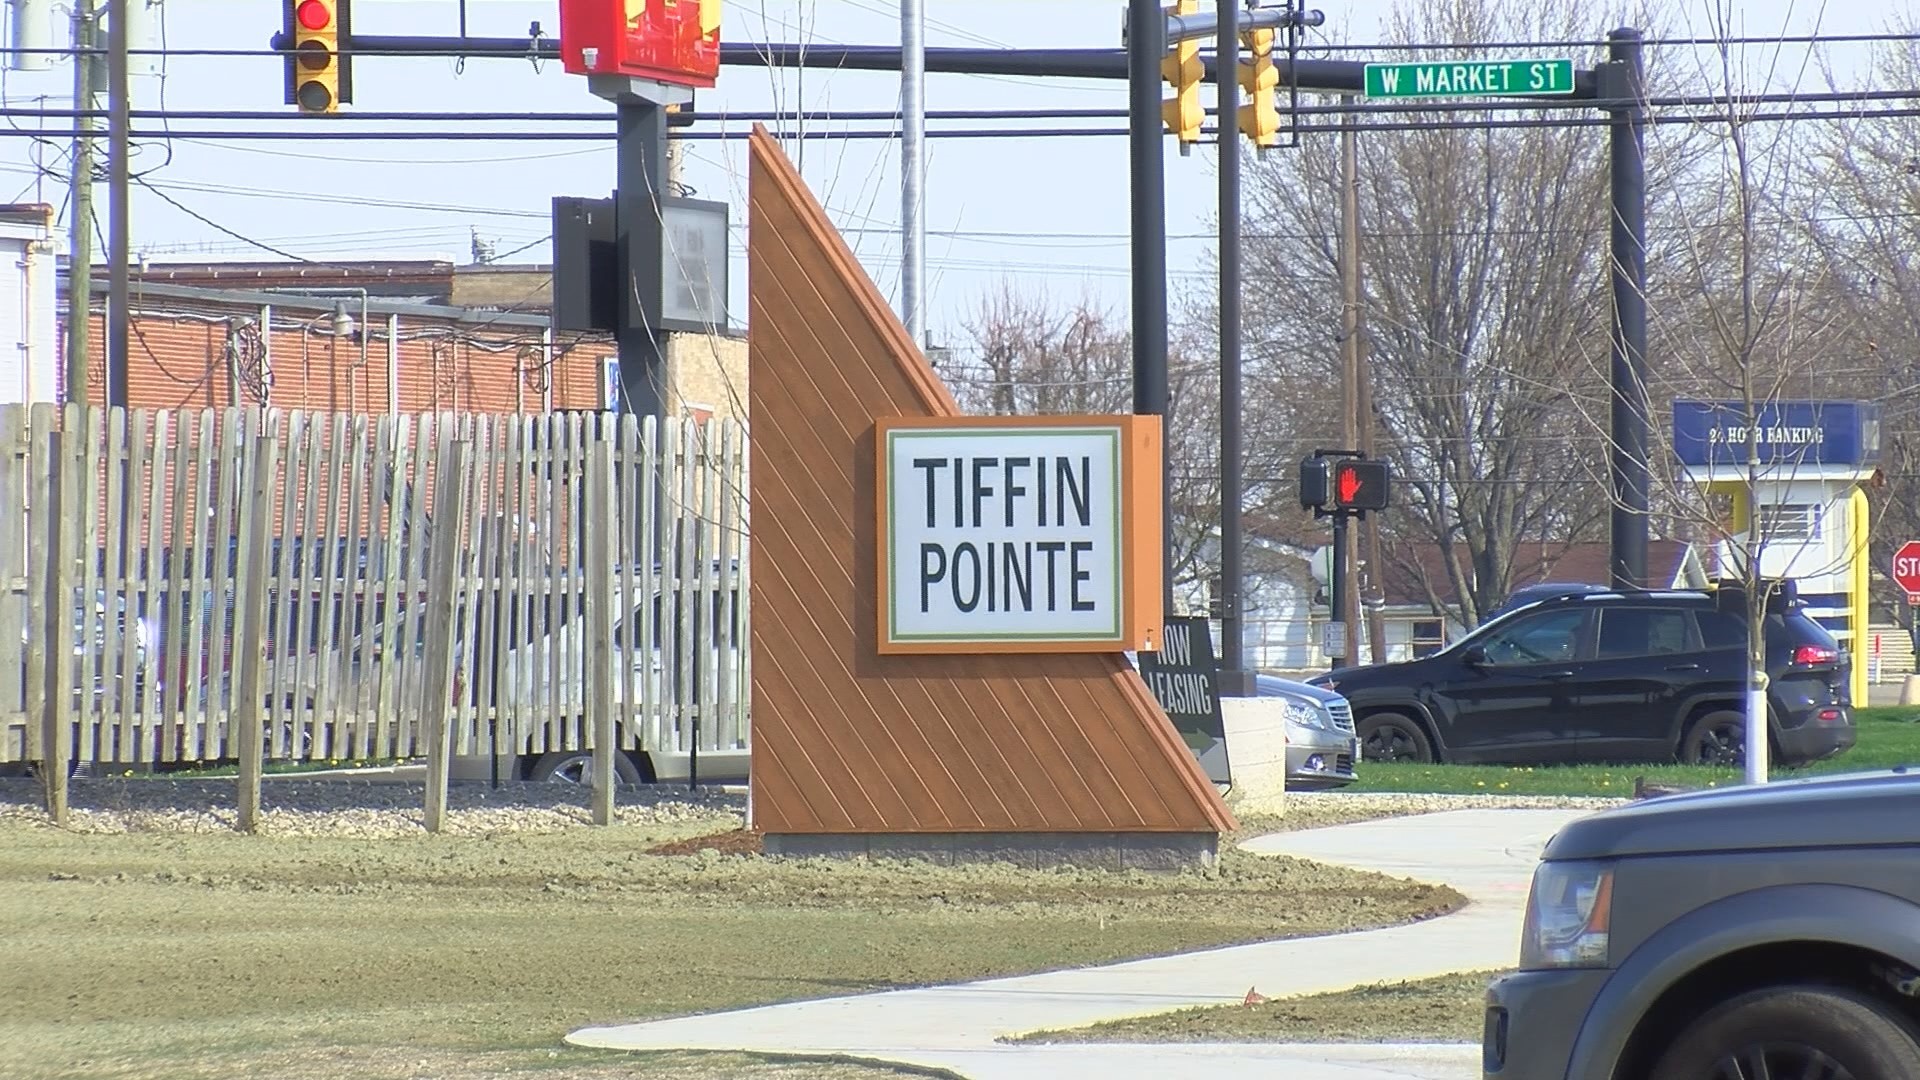 This second phase of construction will more than double the occupancy of Tiffin Pointe on Market Street